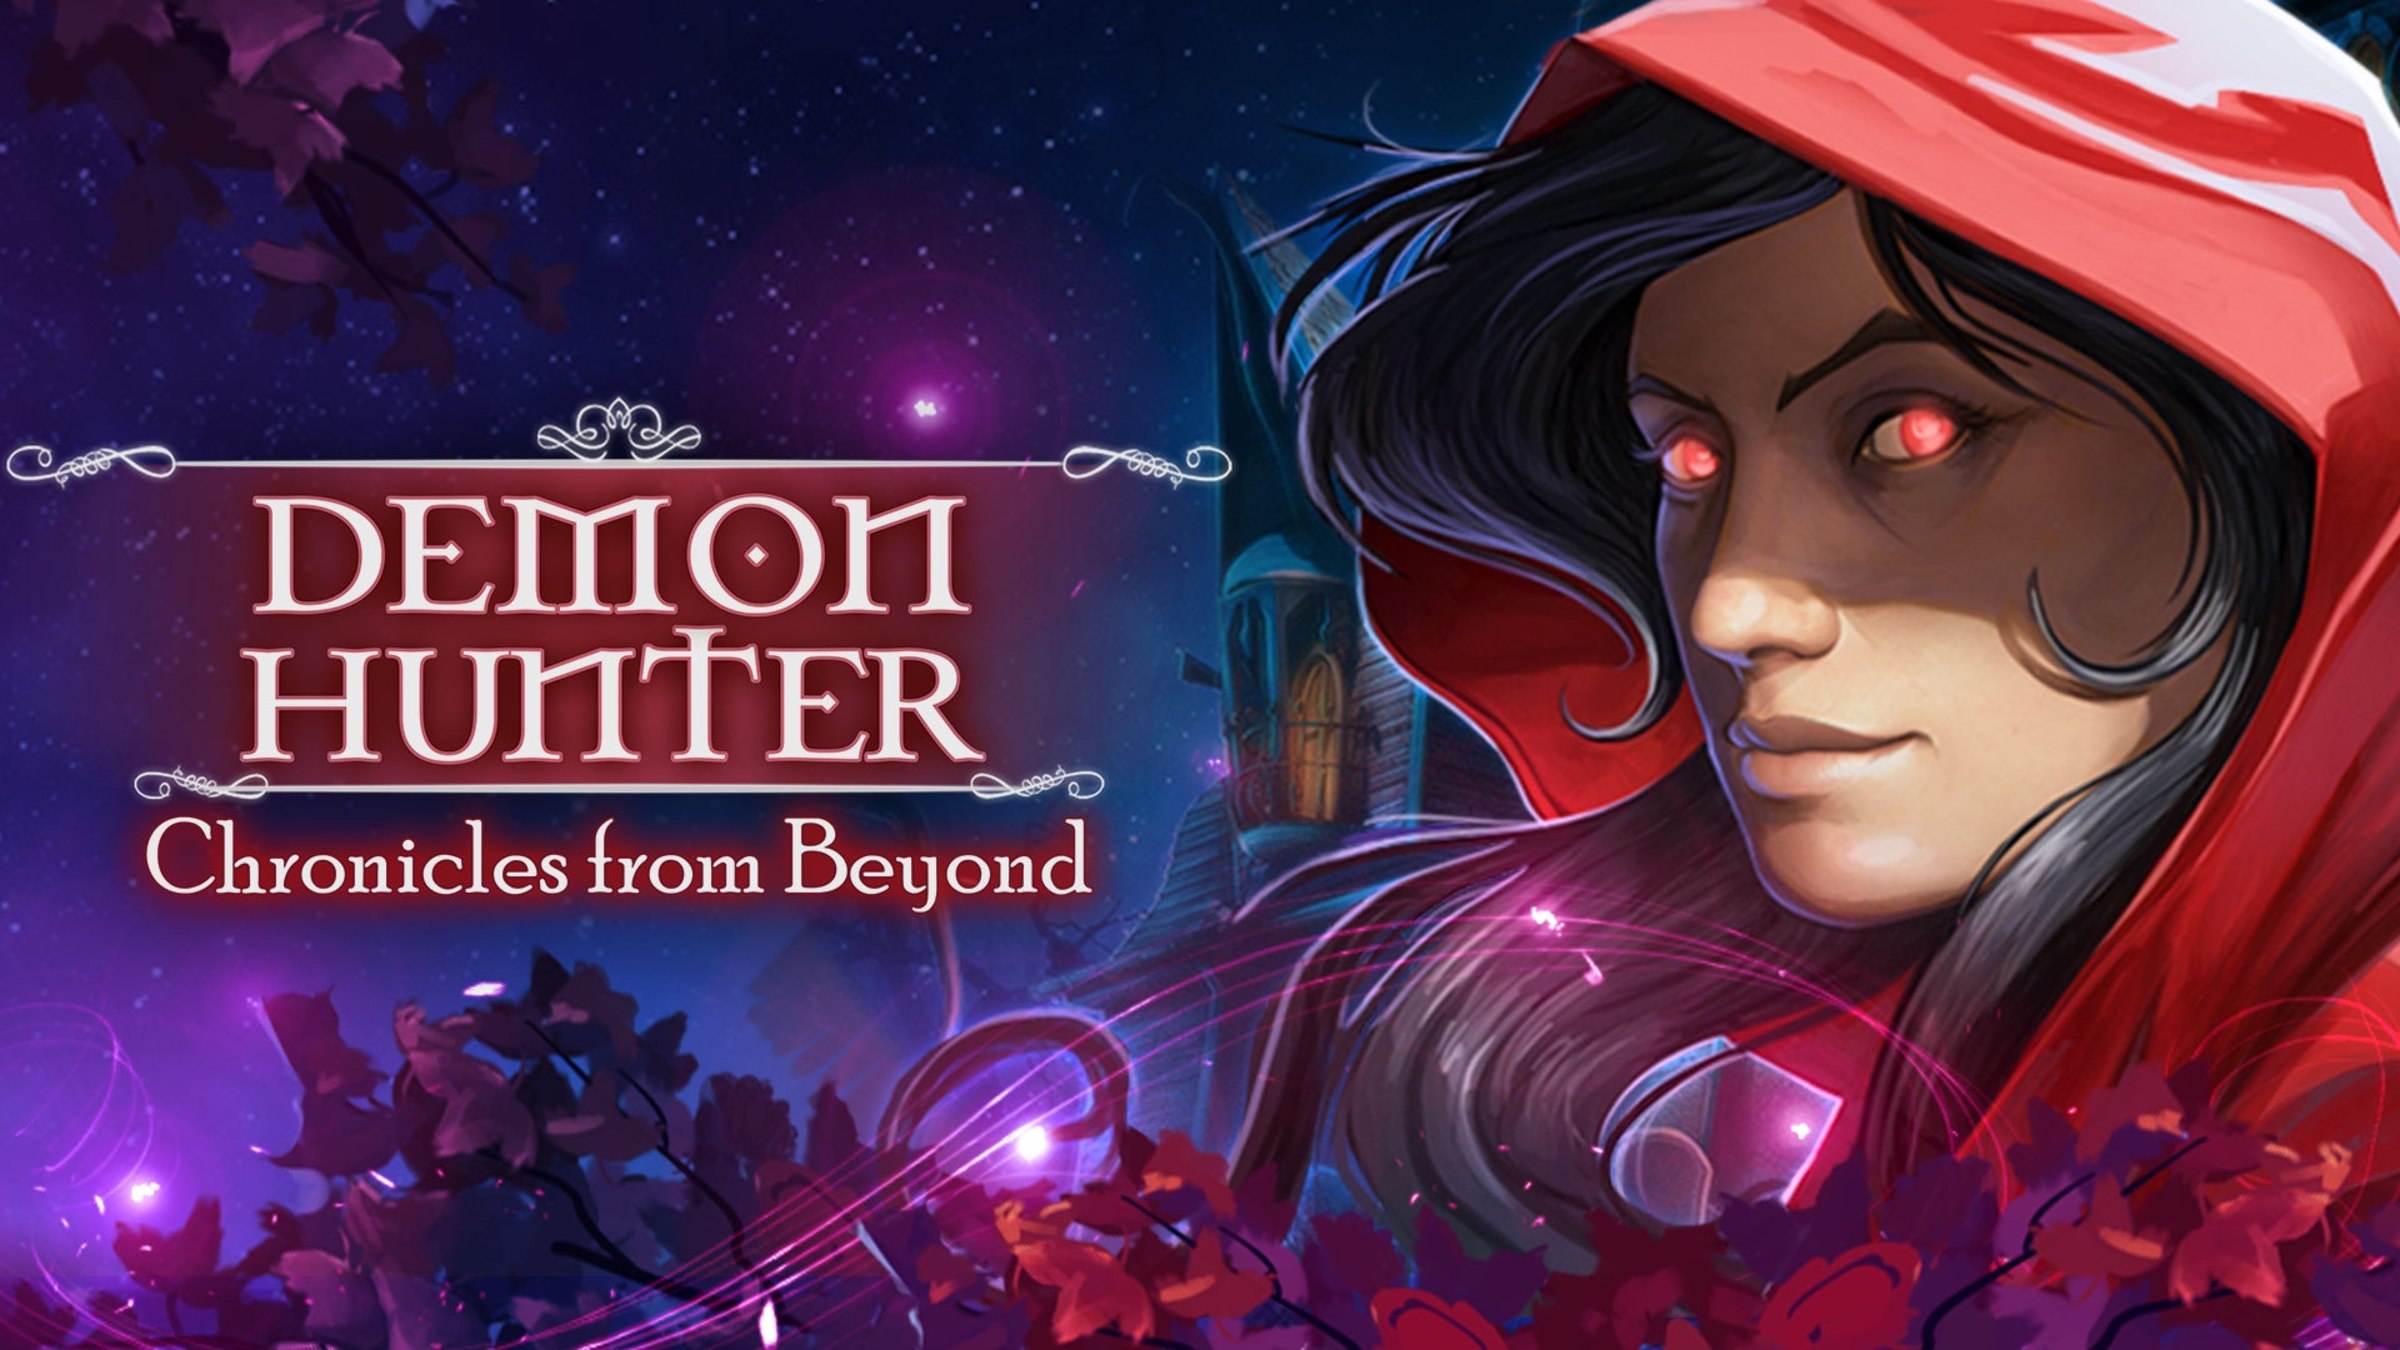 Dawn Of The Dragon Ch 21 Demon Hunter: Chronicles from Beyond for Nintendo Switch - Nintendo  Official Site